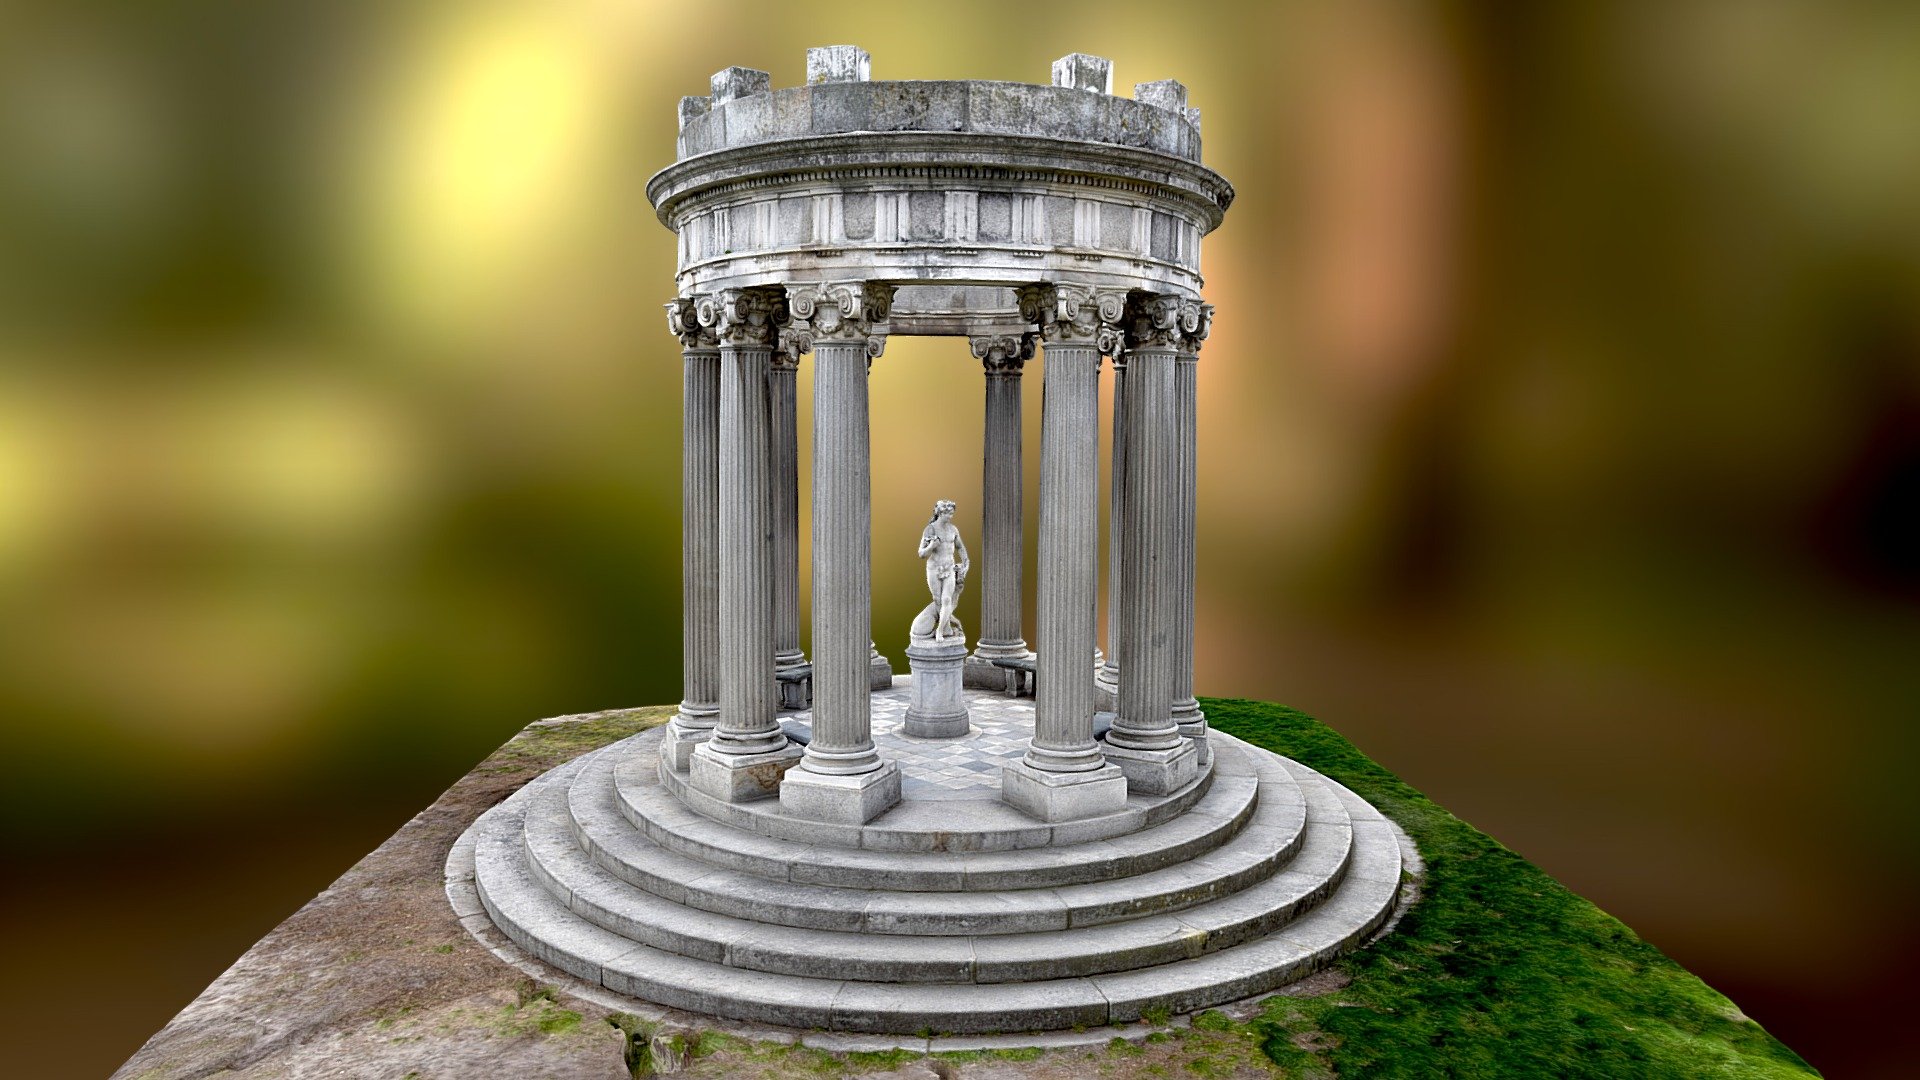 The Temple of Bacchus

Find me on Soulbank at

https://www.soulbank.com/2020/03/17/the-temple-of-bacchus-el-capricho-park-madrid/ - Temple of Bacchus - 3D model by Soulbank 3d model